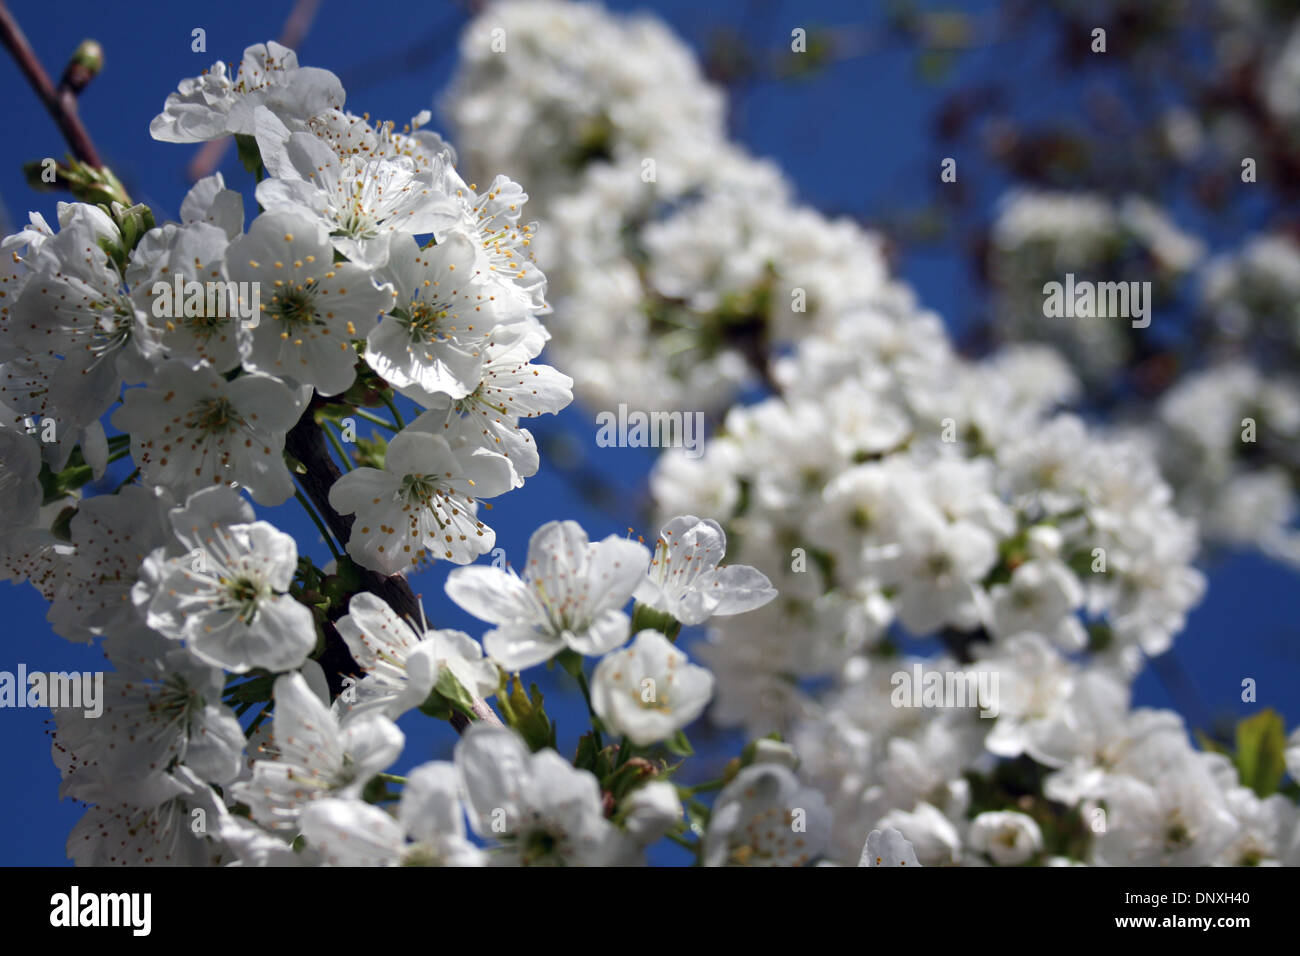 Cherry Blossom at Spring,Happy New Year(Norooz is Beginning of New Year in Iran and for Some other Peoples).Blue Sky & White. Stock Photo